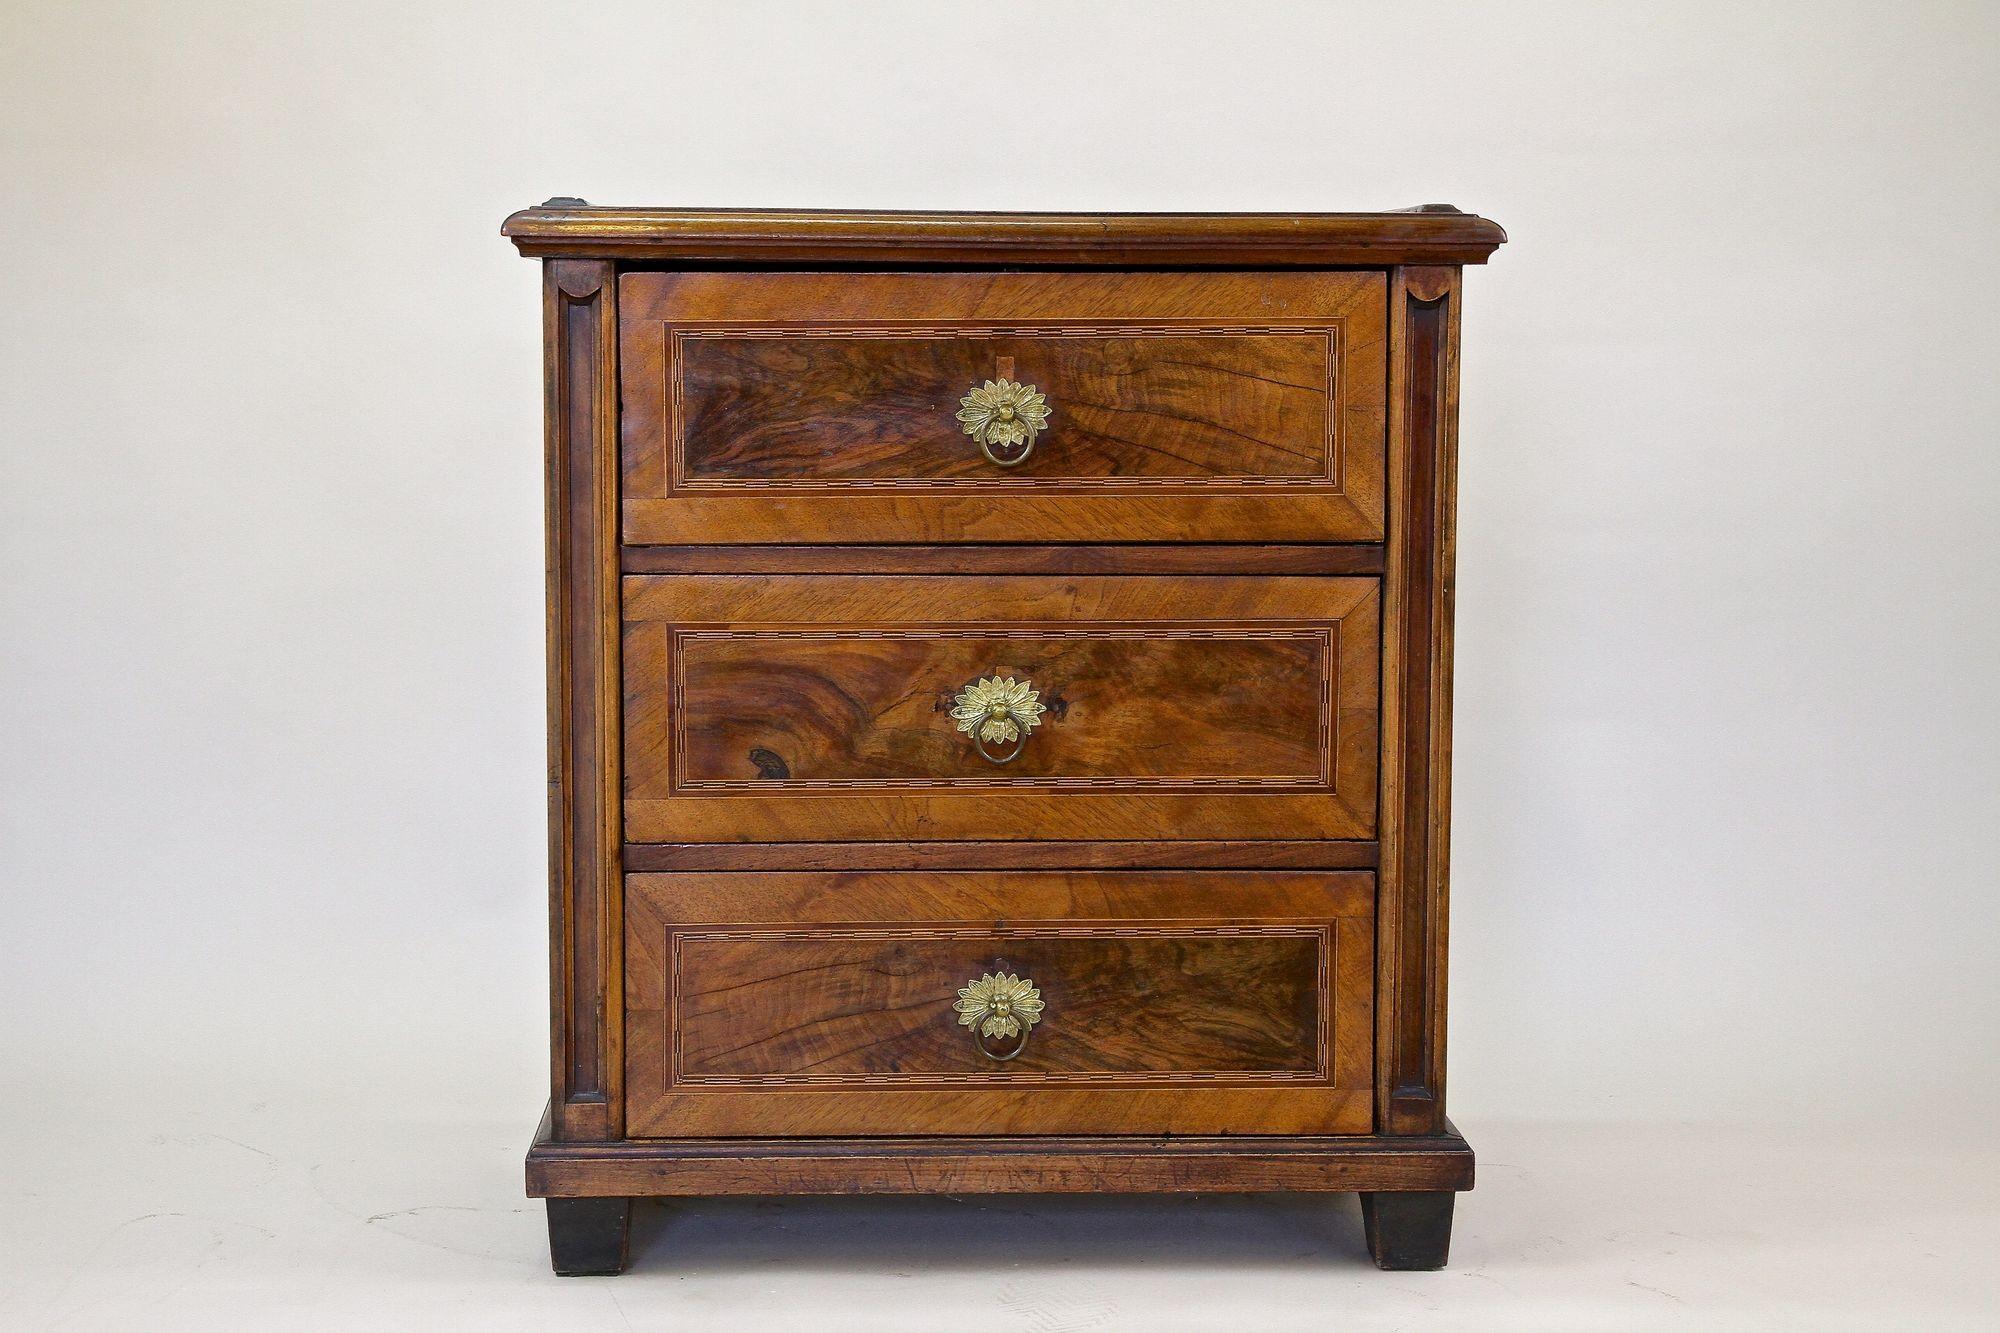 Absolutely beautiful, mid 19th century Biedermeier nutwood chest of drawers coming out of Austria. Made in the so-called 